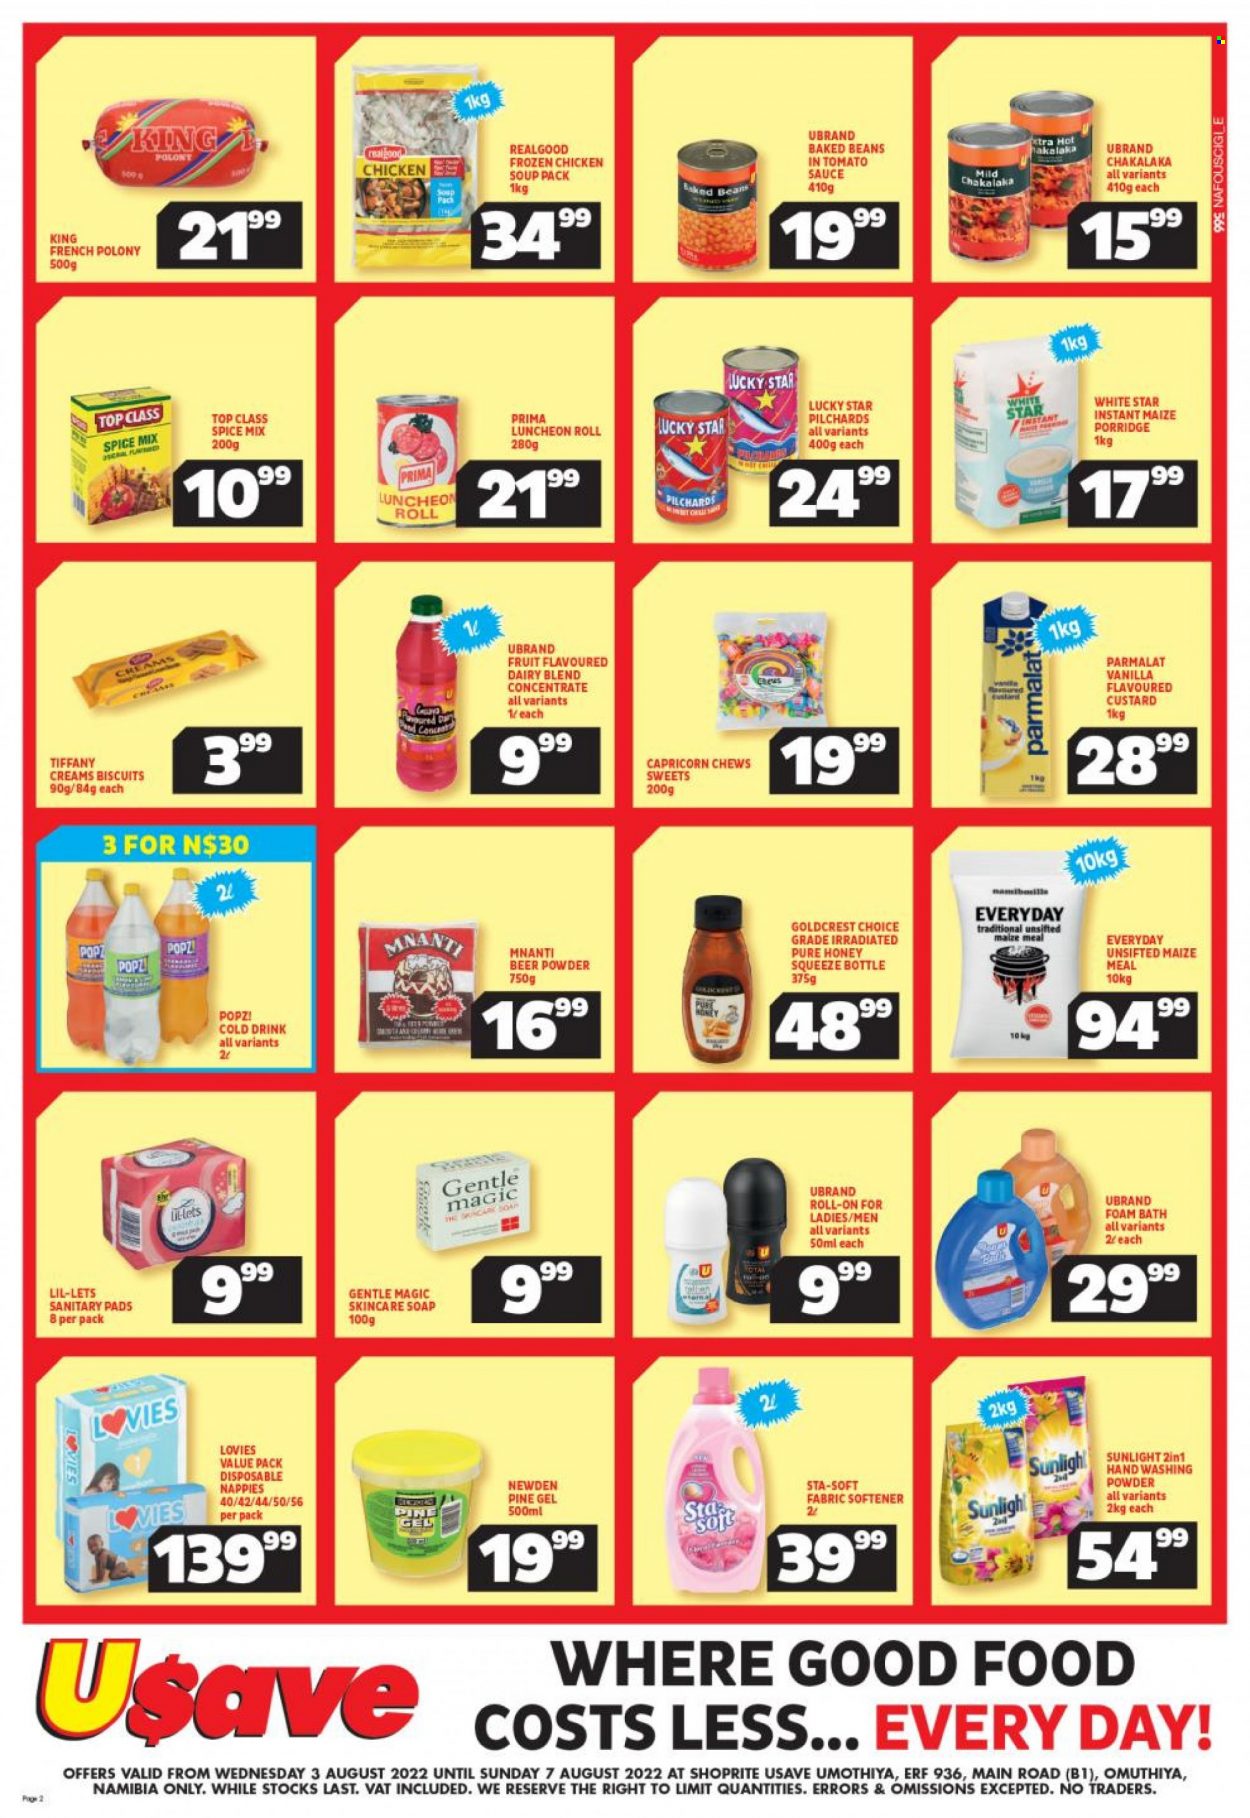 Shoprite catalogue  - 03/08/2022 - 07/08/2022 - Sales products - beans, sardines, chicken soup, soup, chakalaka, french polony, polony, lunch meat, custard, Parmalat, dairy blend, chewing gum, biscuit, maize meal, White Star, baked beans, porridge, spice, honey, beer, chicken meat, nappies, fabric softener, laundry powder, Sunlight, XTRA, bath foam, soap, sanitary pads, Lil-lets, Gentle Magic. Page 2.